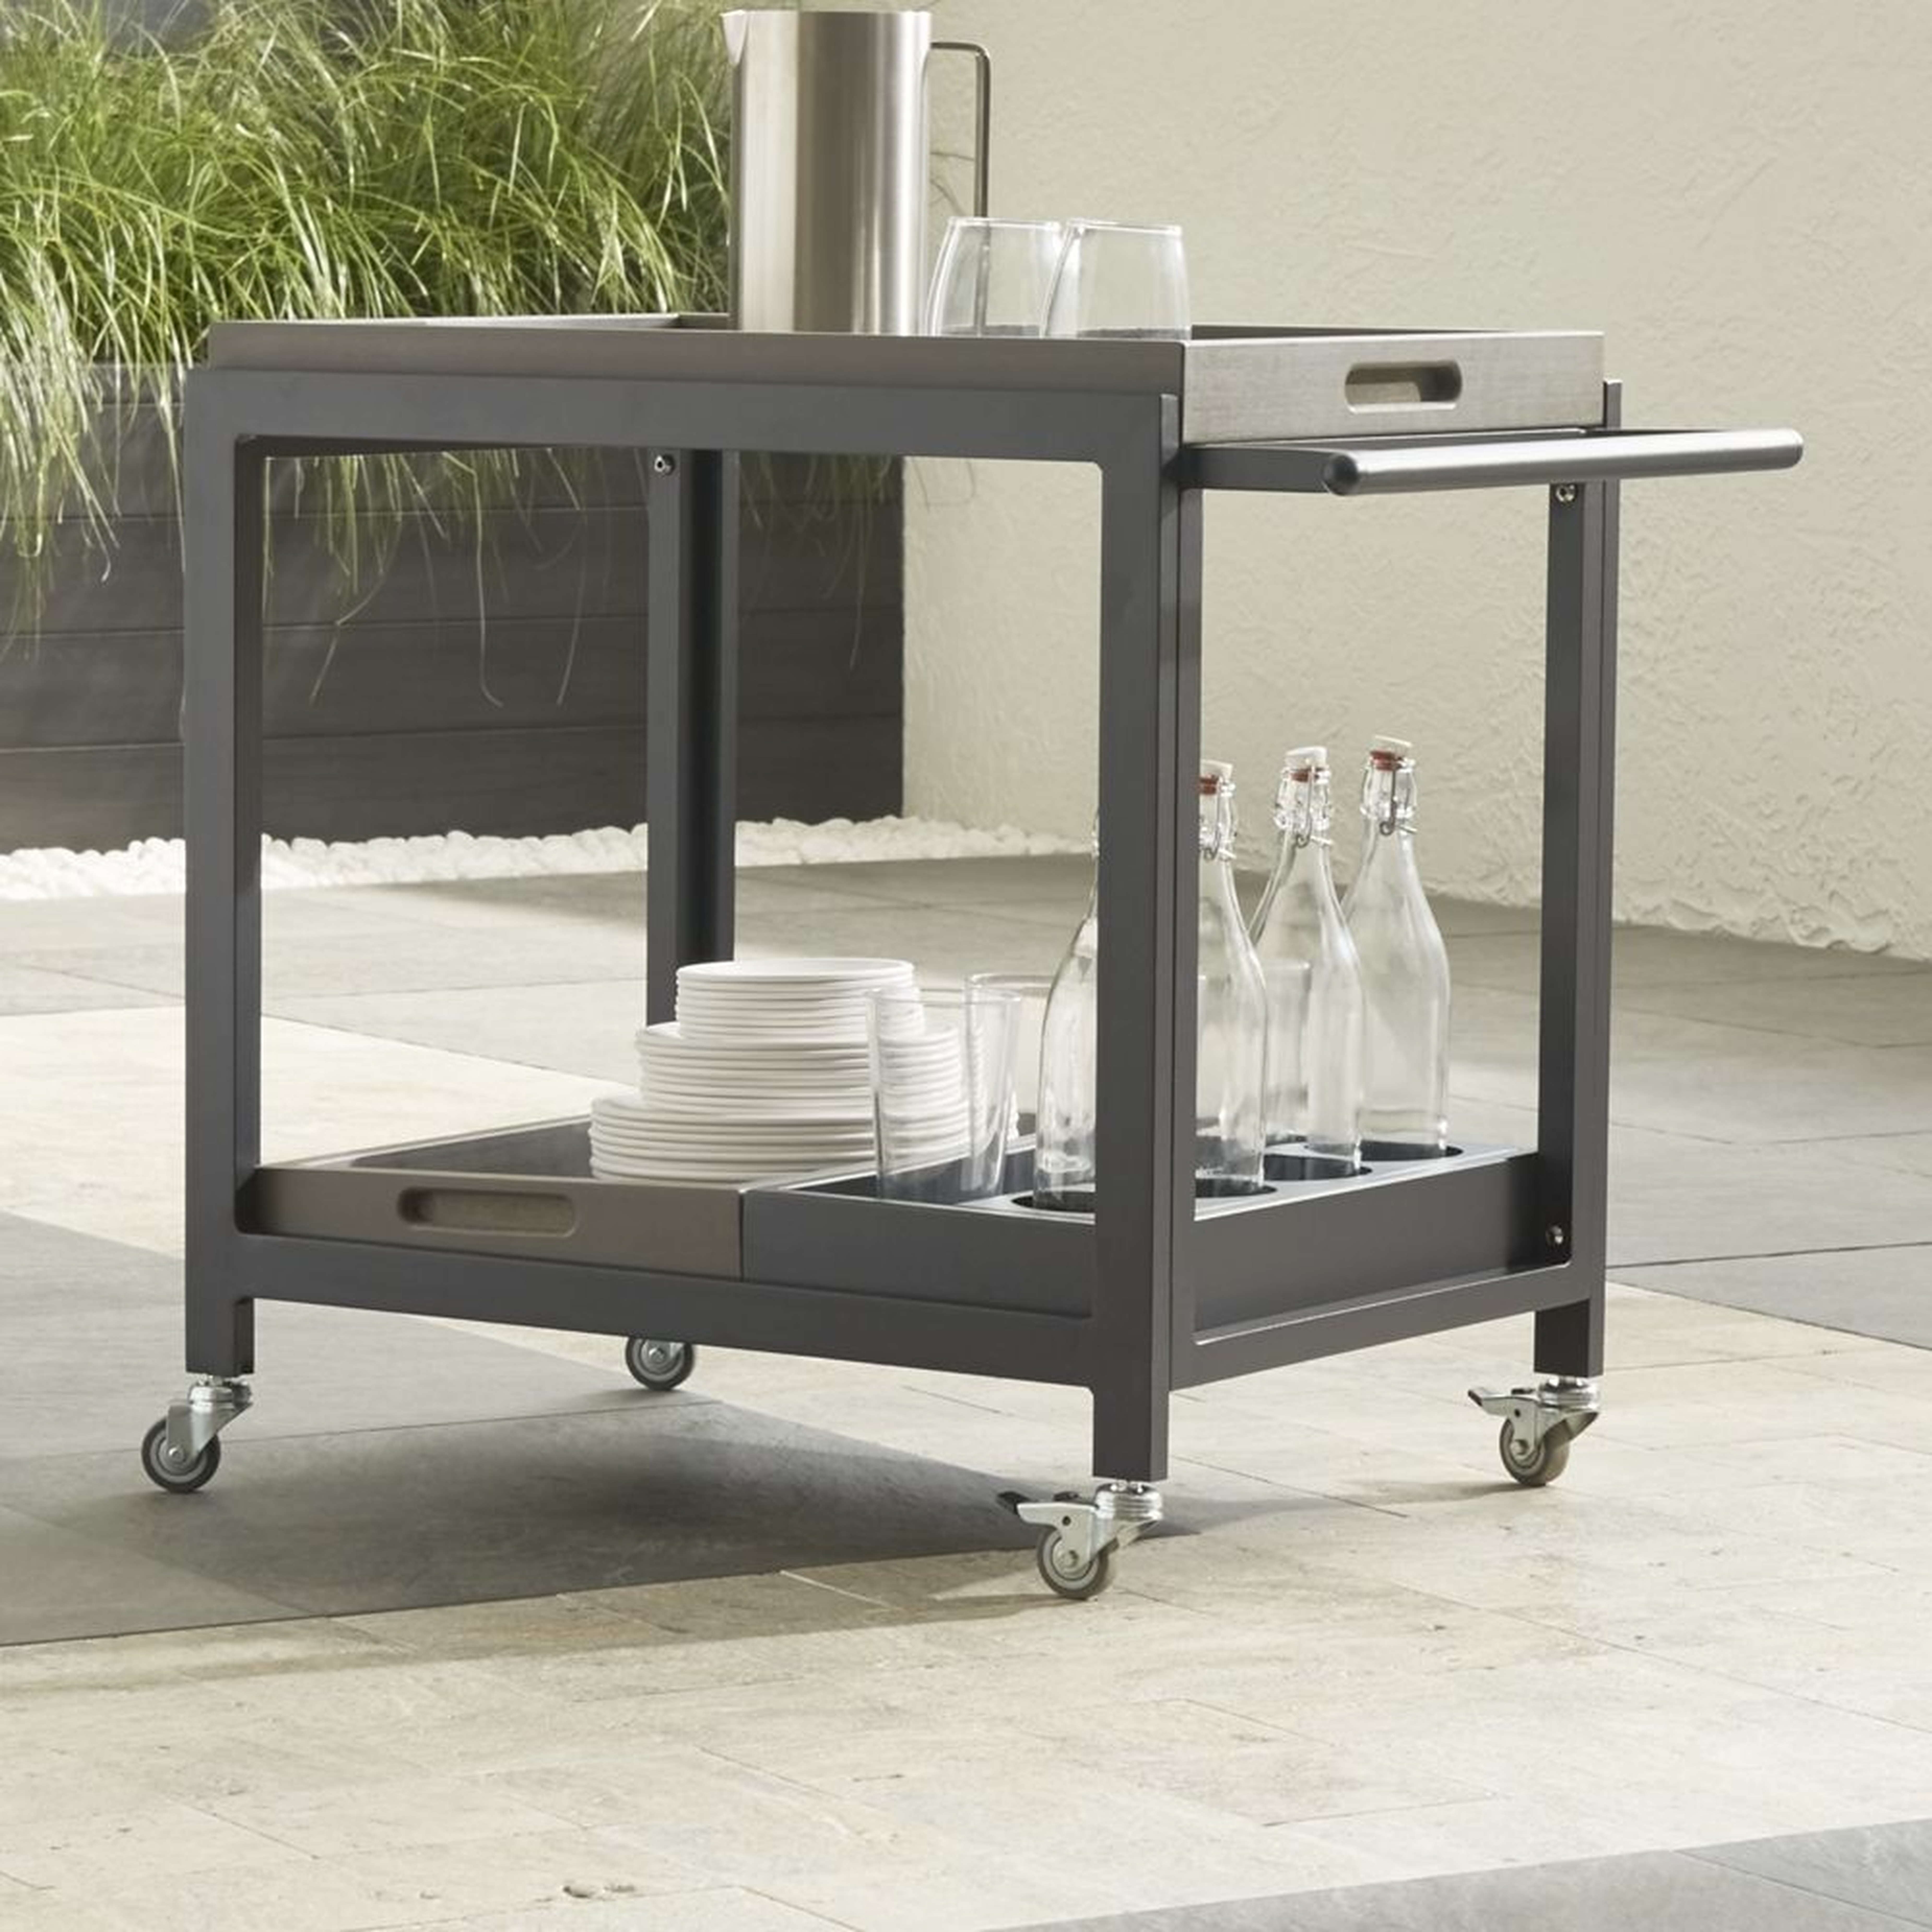 Alfresco II Grey Cart with Casters - Crate and Barrel